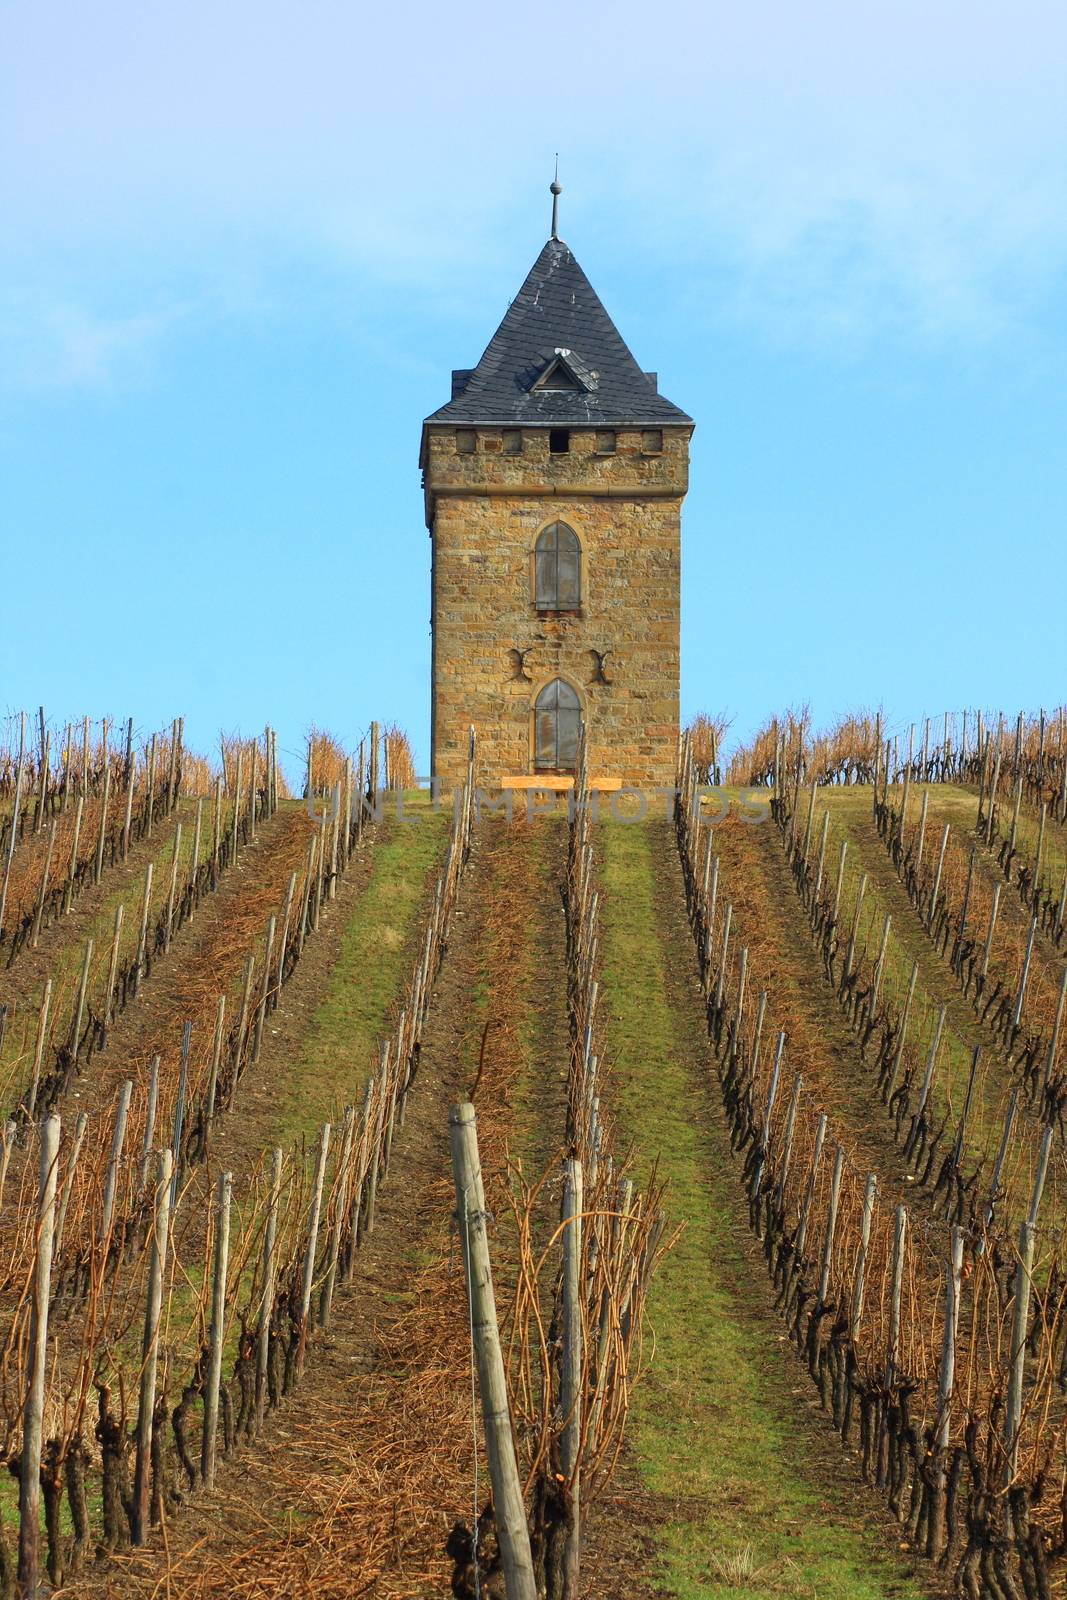 an old, square, tower with pointed roof in the Vineyard     Ein alter,eckiger,Turm mit spitzdach im Weinberg